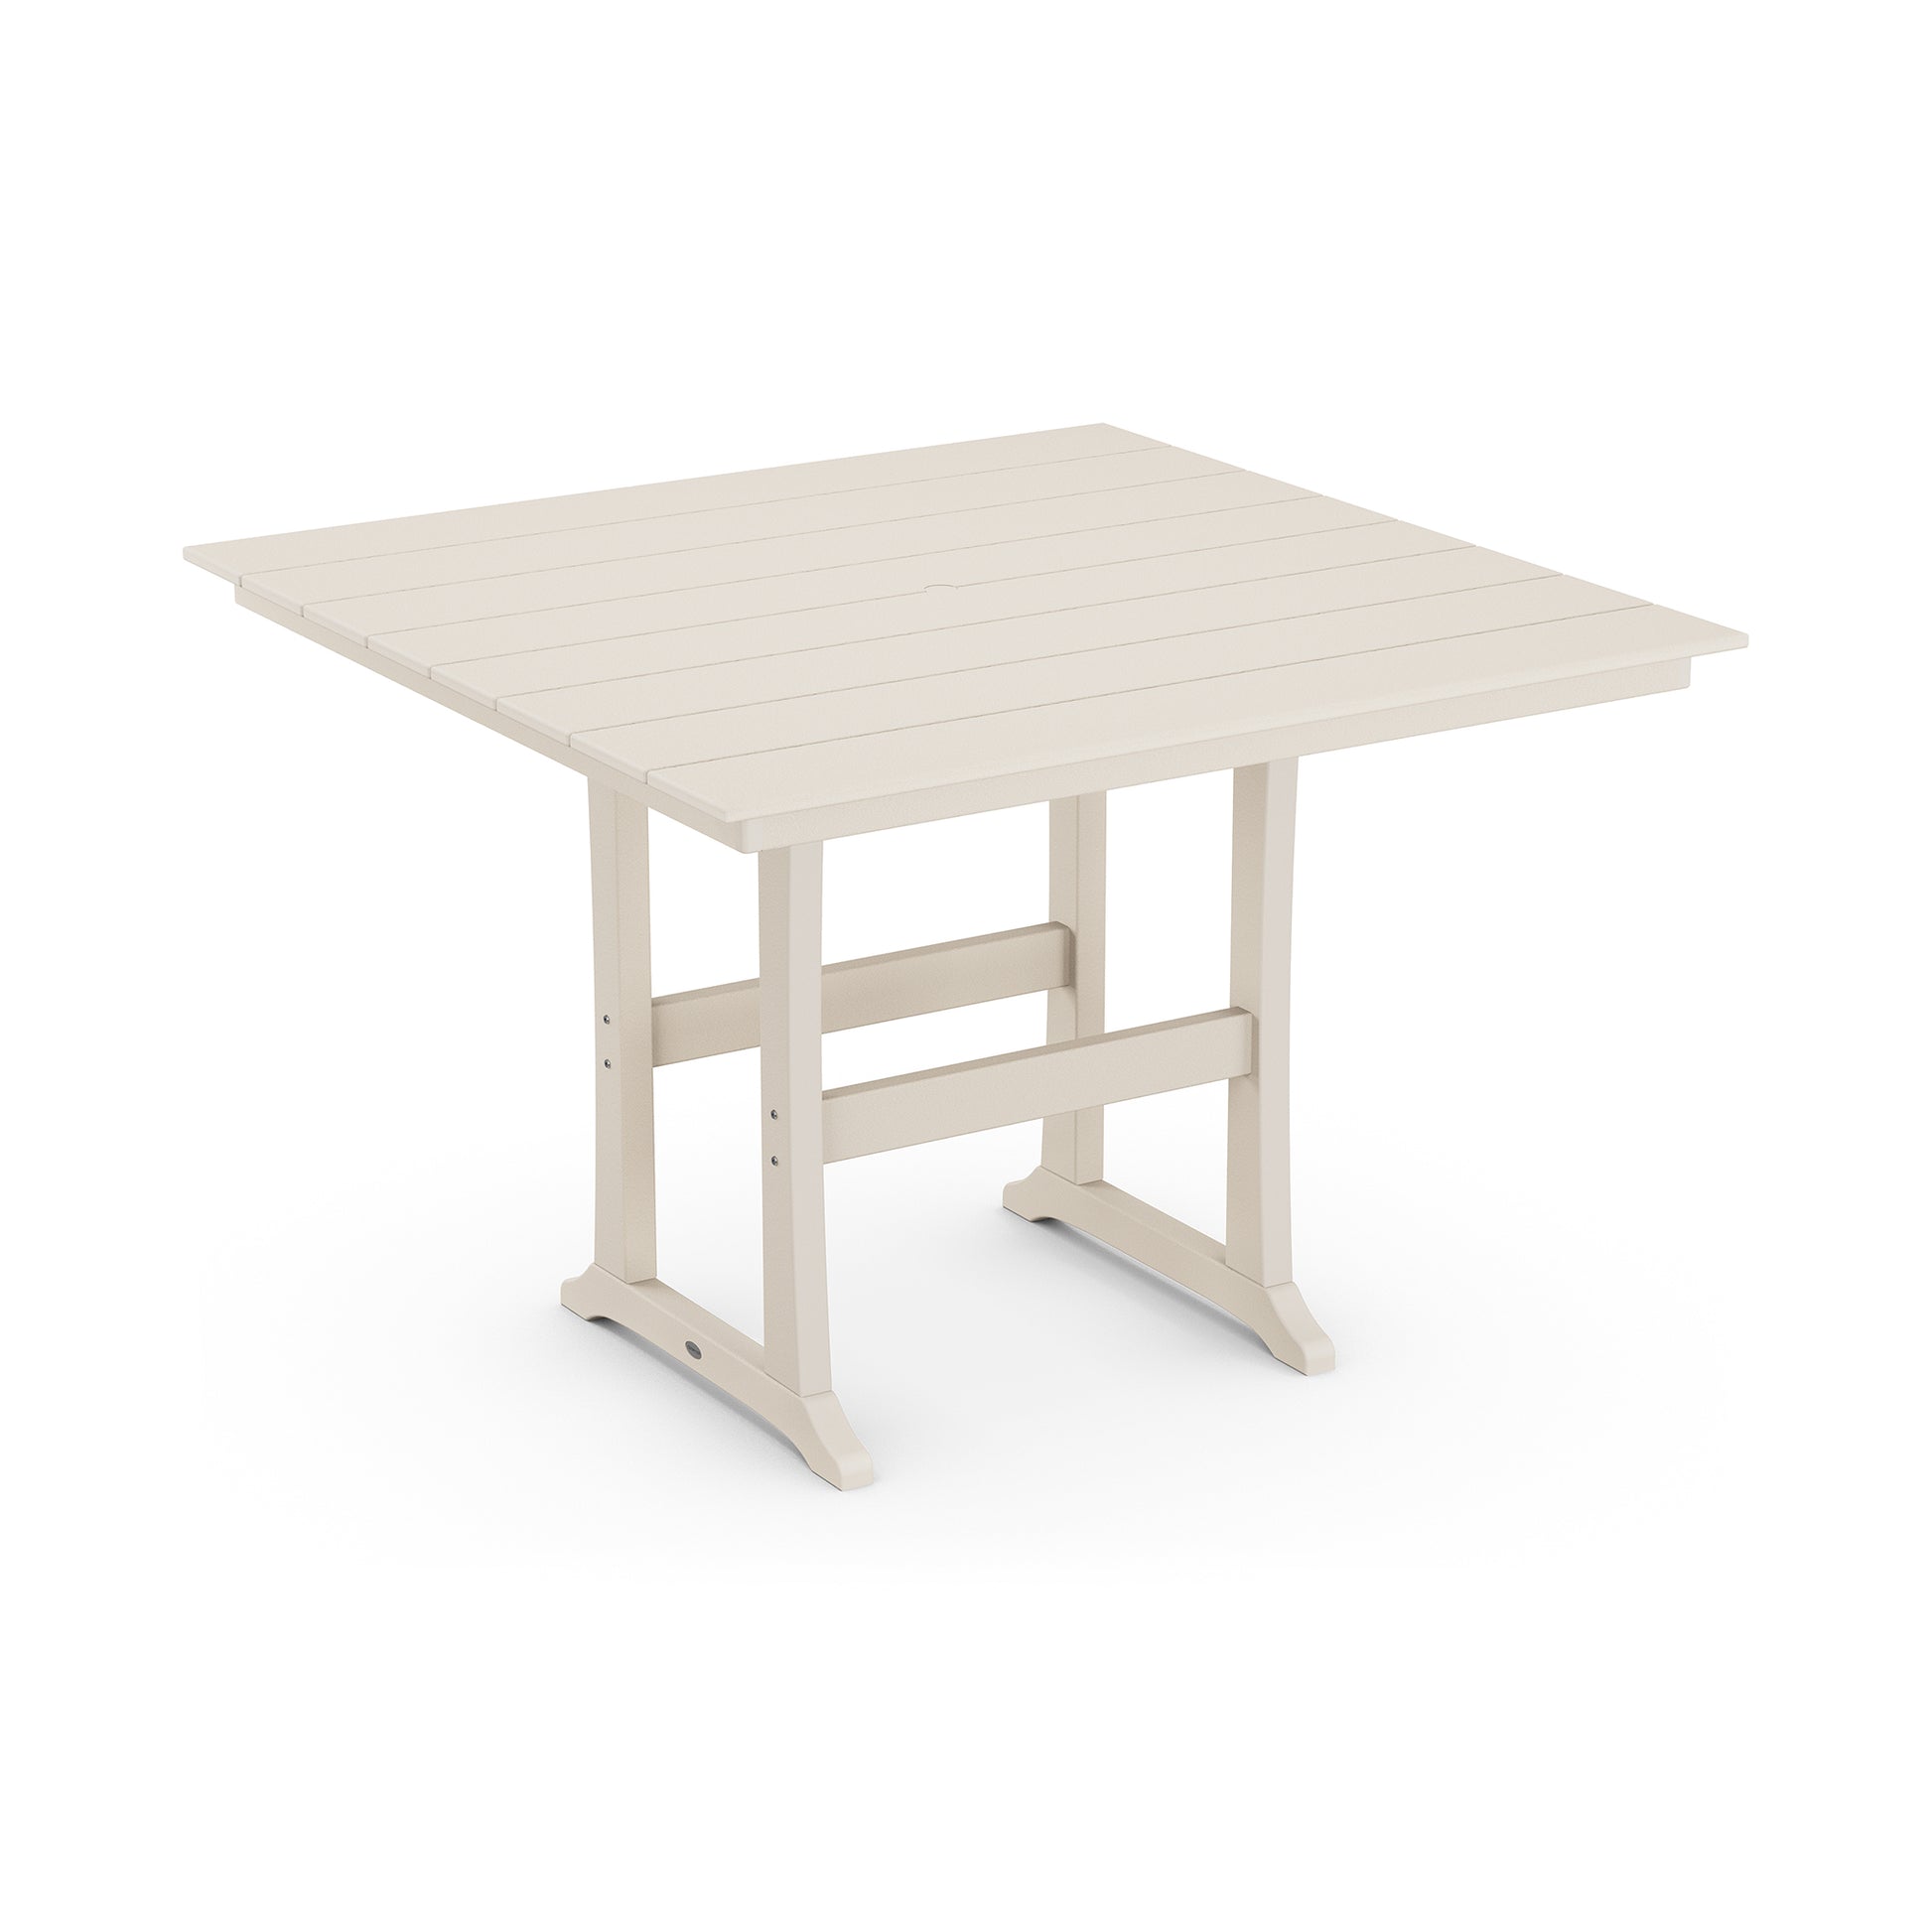 A modern, cream-colored POLYWOOD Farmhouse Trestle 59" bar height outdoor table with a slatted top and sturdy frame, shown in an isolated view with a plain white background.